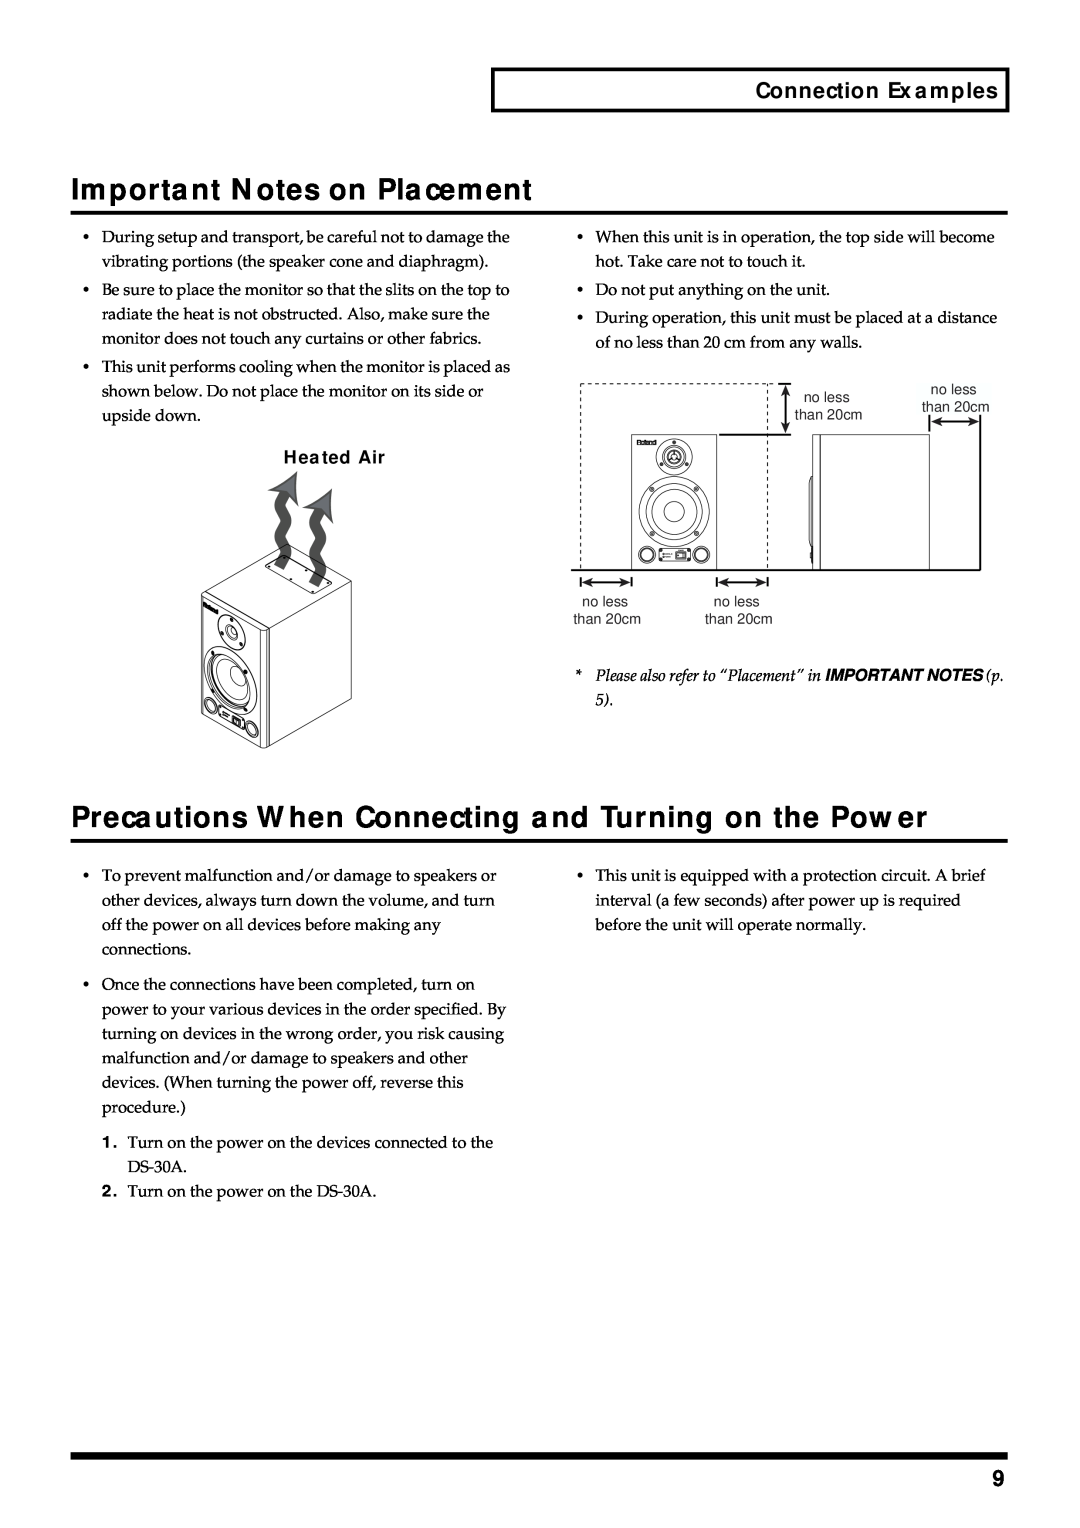 Roland DS-30A Important Notes on Placement, Precautions When Connecting and Turning on the Power, Connection Examples 